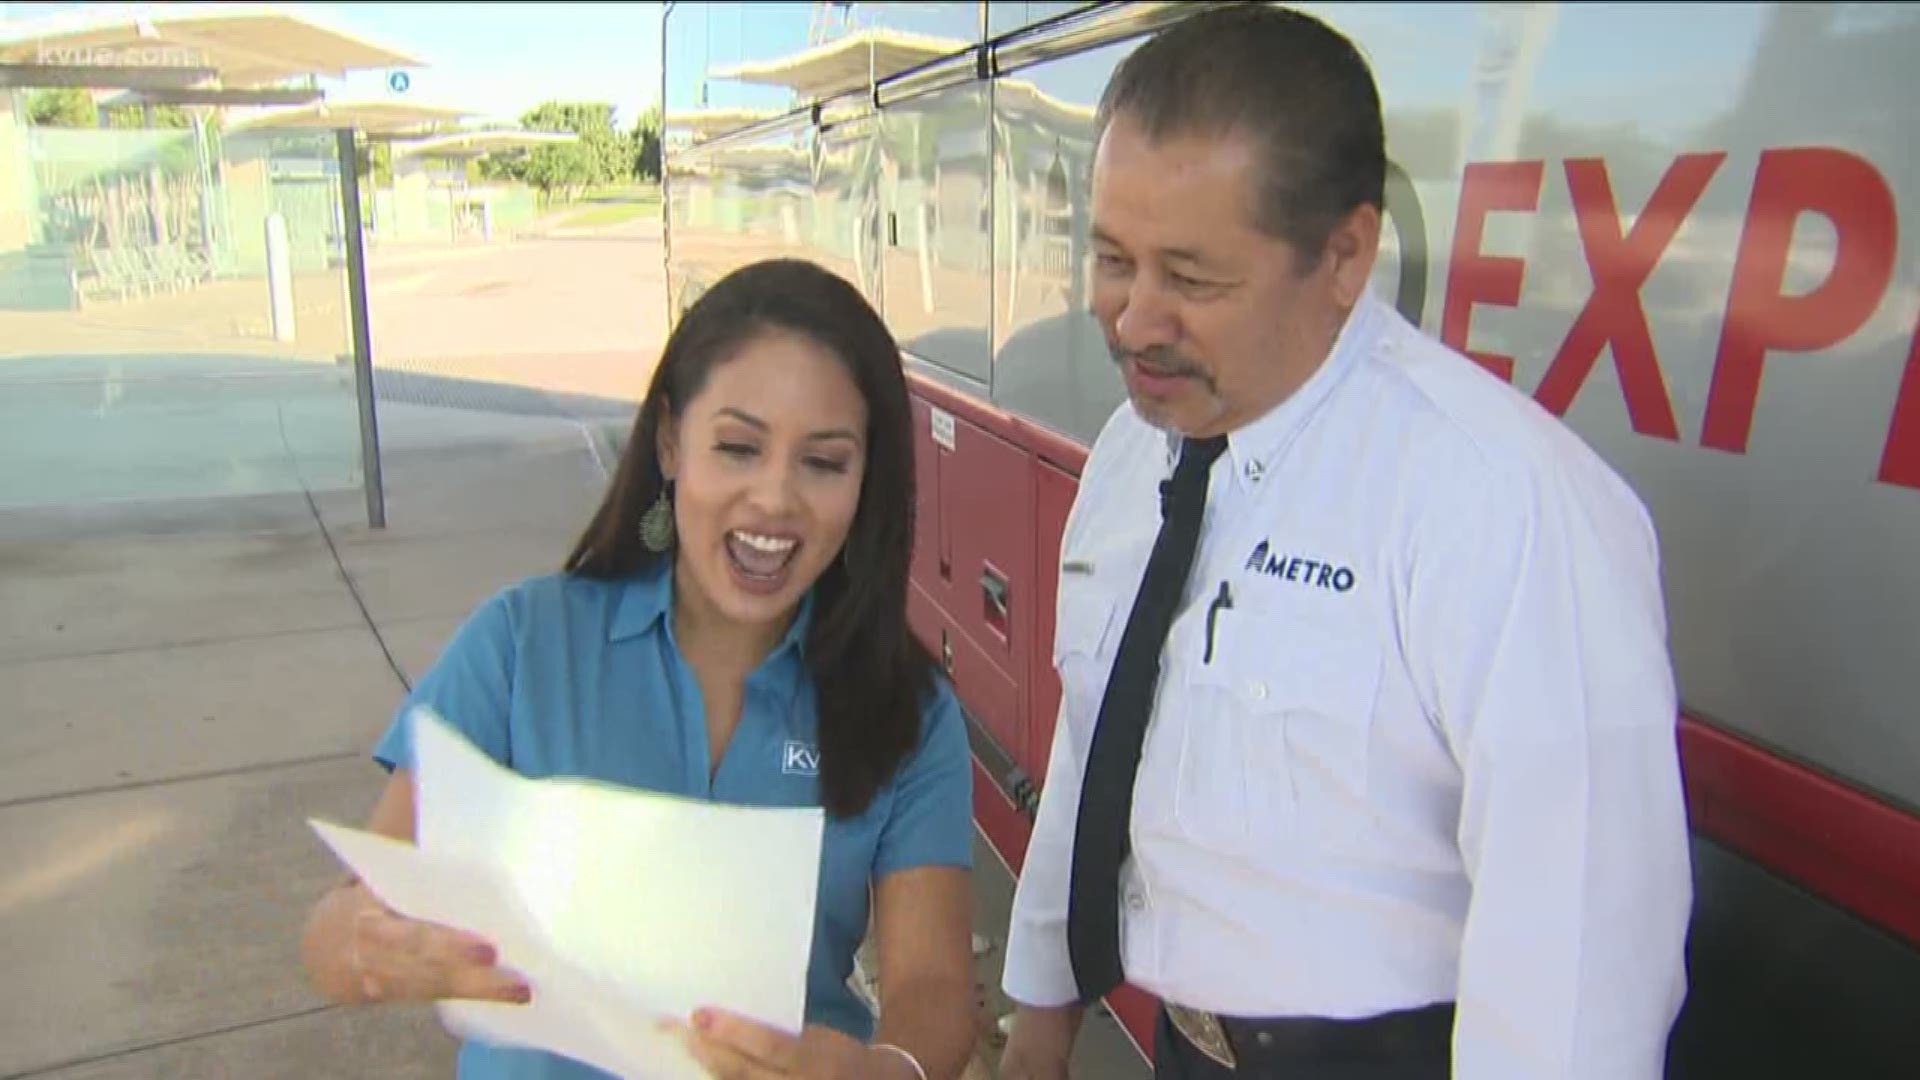 KVUE's Anavid Reyes got the chance to see firsthand what it takes to keep CapMetro buses running smoothly in Austin, Texas.